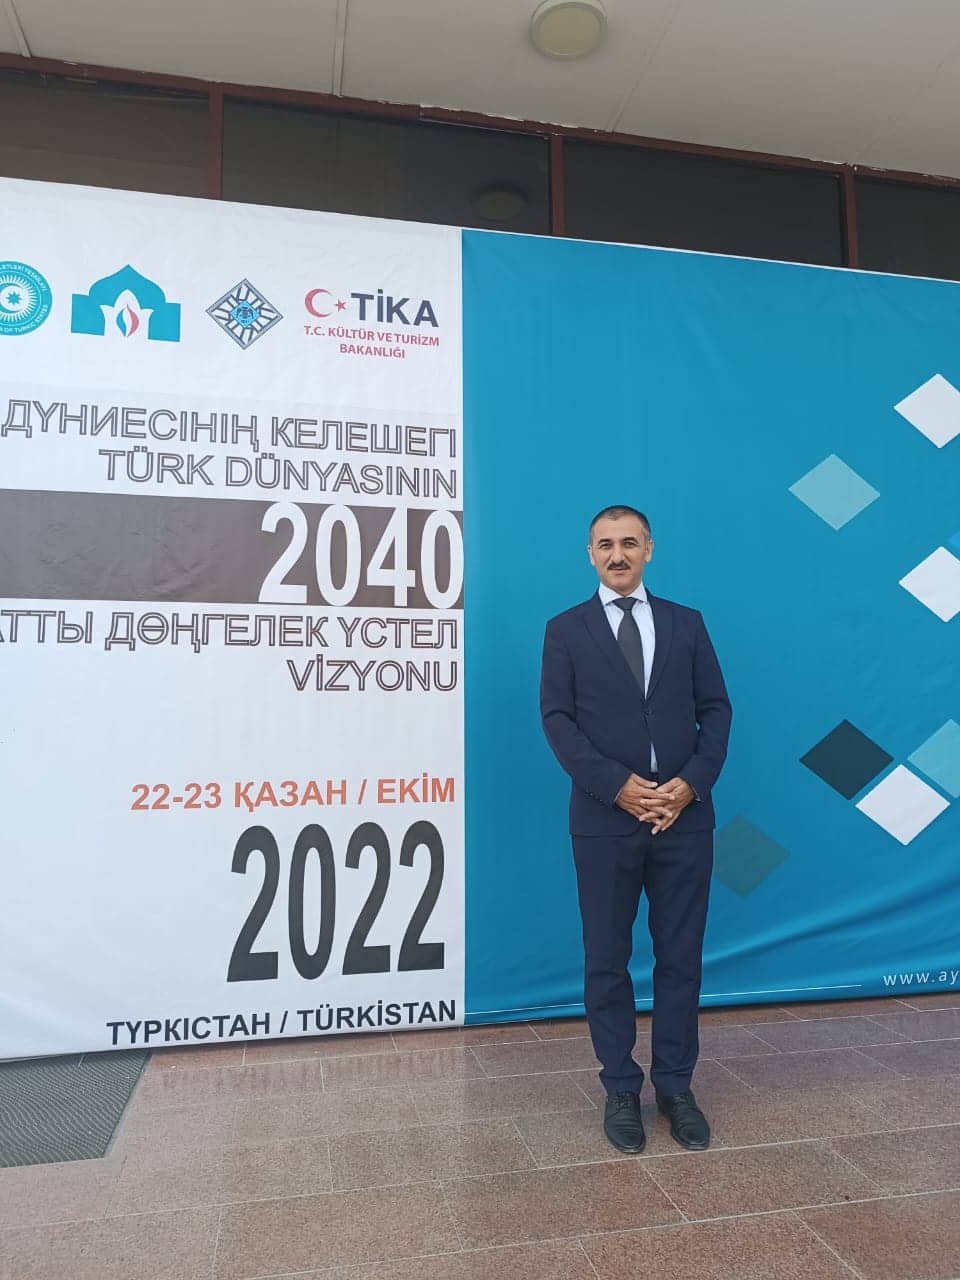 Ramil Huseyin attended the "Turkish World 2040 Vision" conference in Kazakhstan